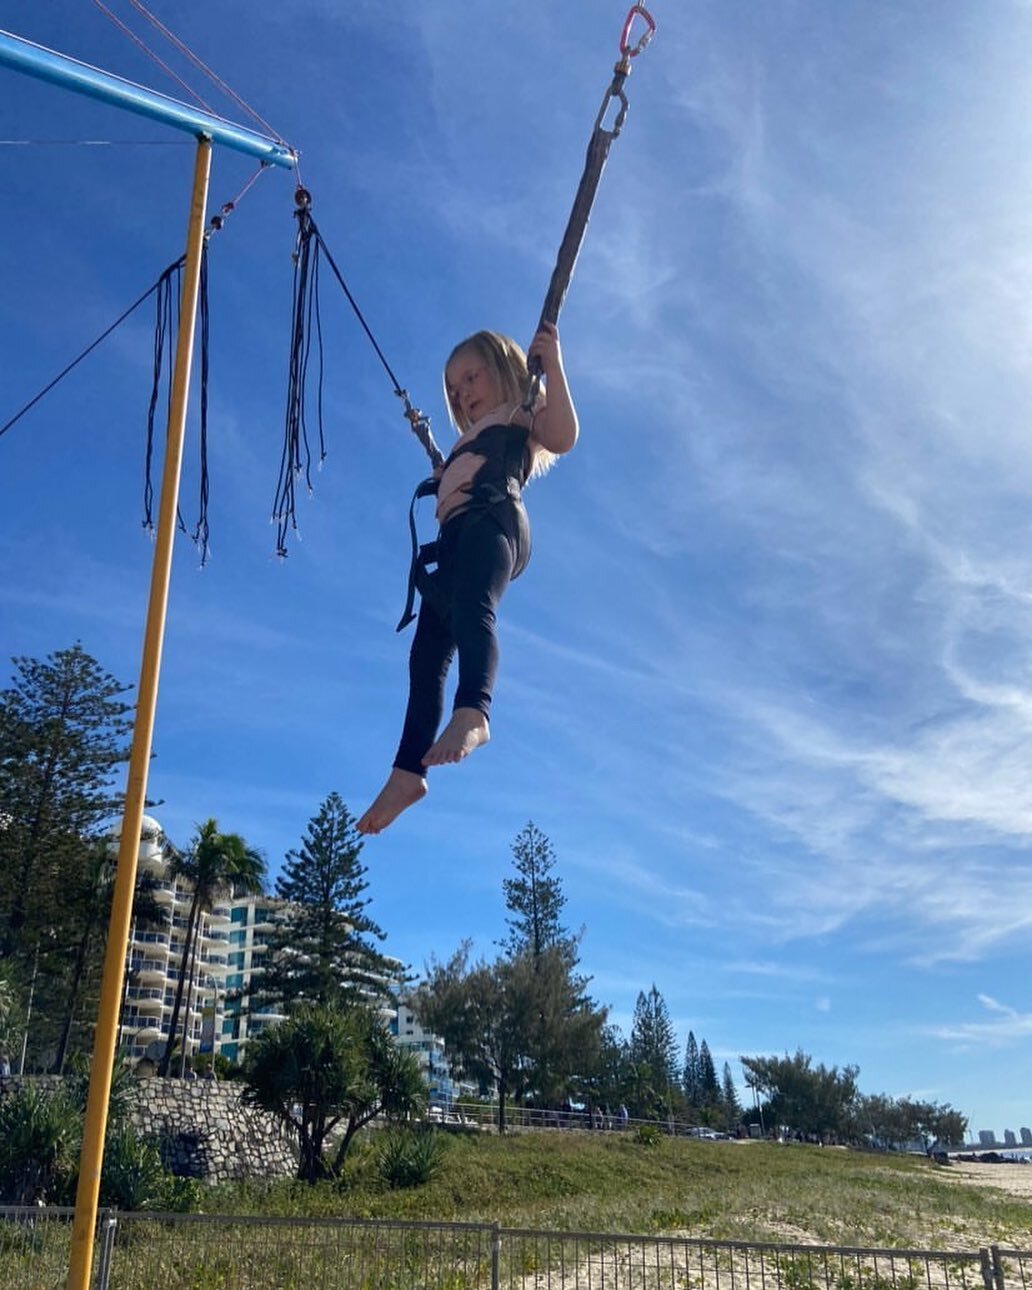 &ldquo;I recommend Tomato frames to anyone who asks or mentions their child needs glasses. They have been so amazing for our girl. They fit so well that they never move on her face. She went on this trampoline today, my husband suggested we remove th